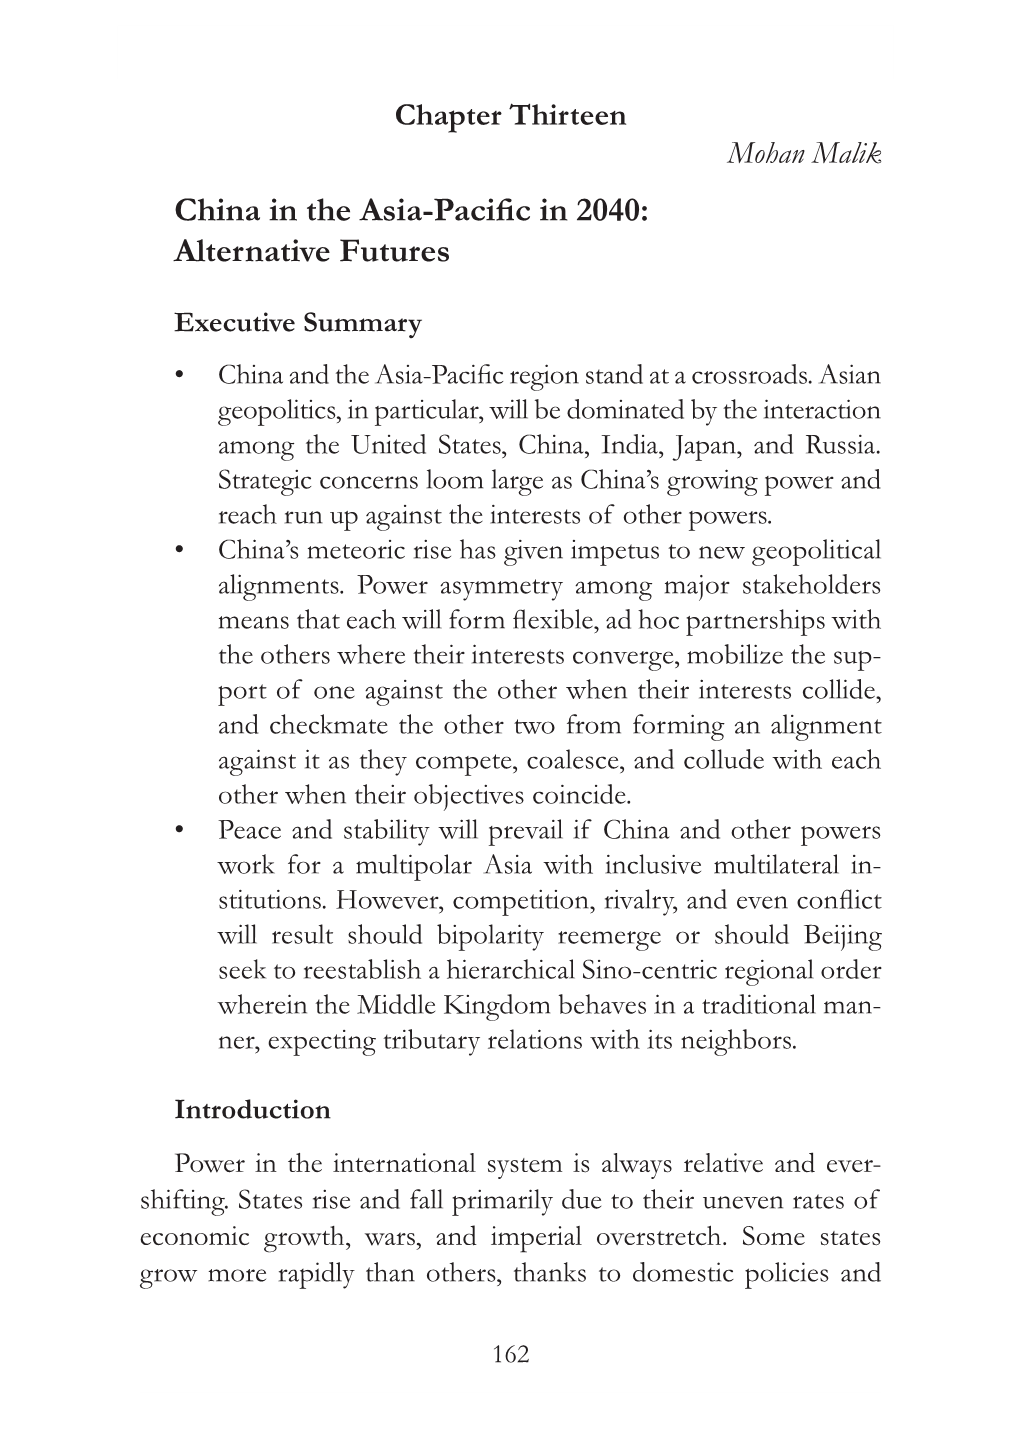 China in the Asia-Pacific in 2040: Alternative Futures